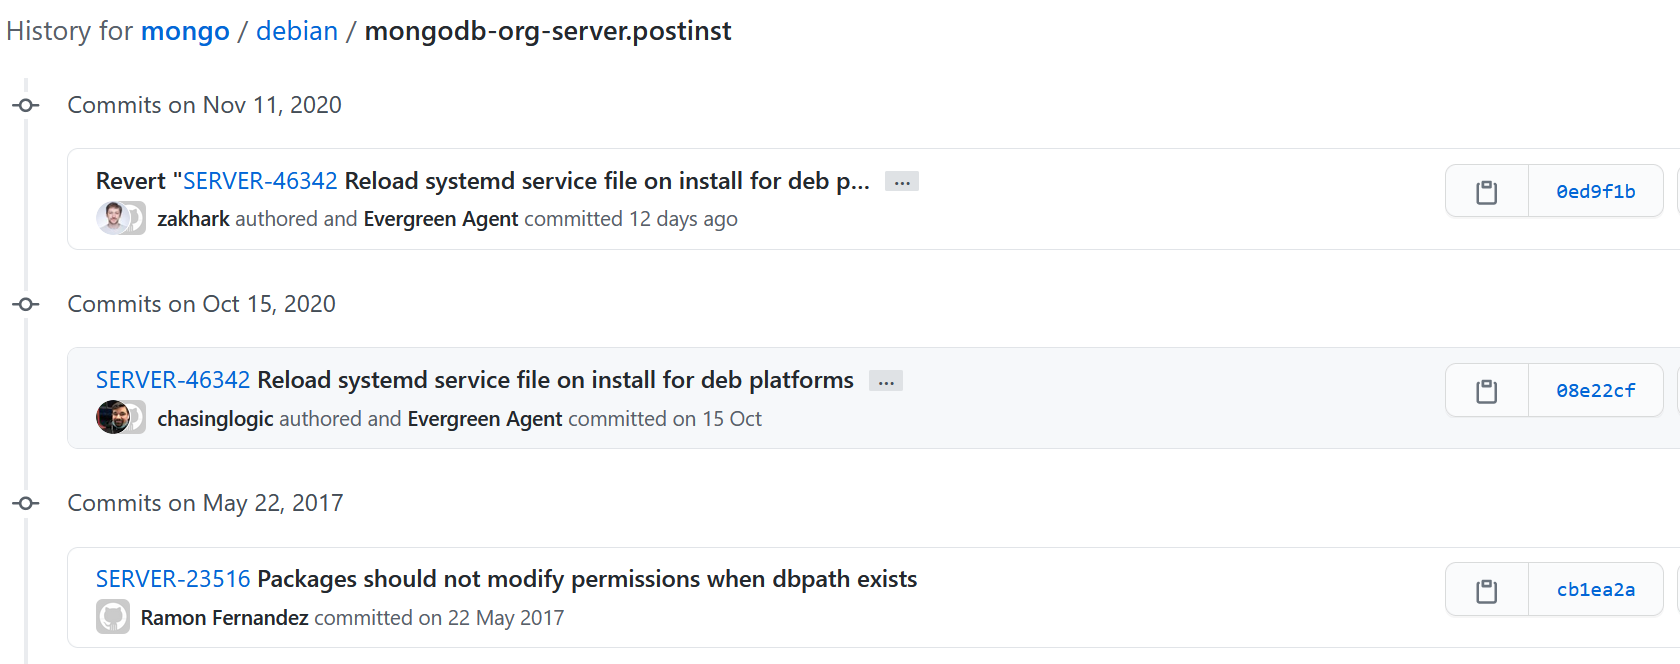 Git history for the post-install script, version 4.0